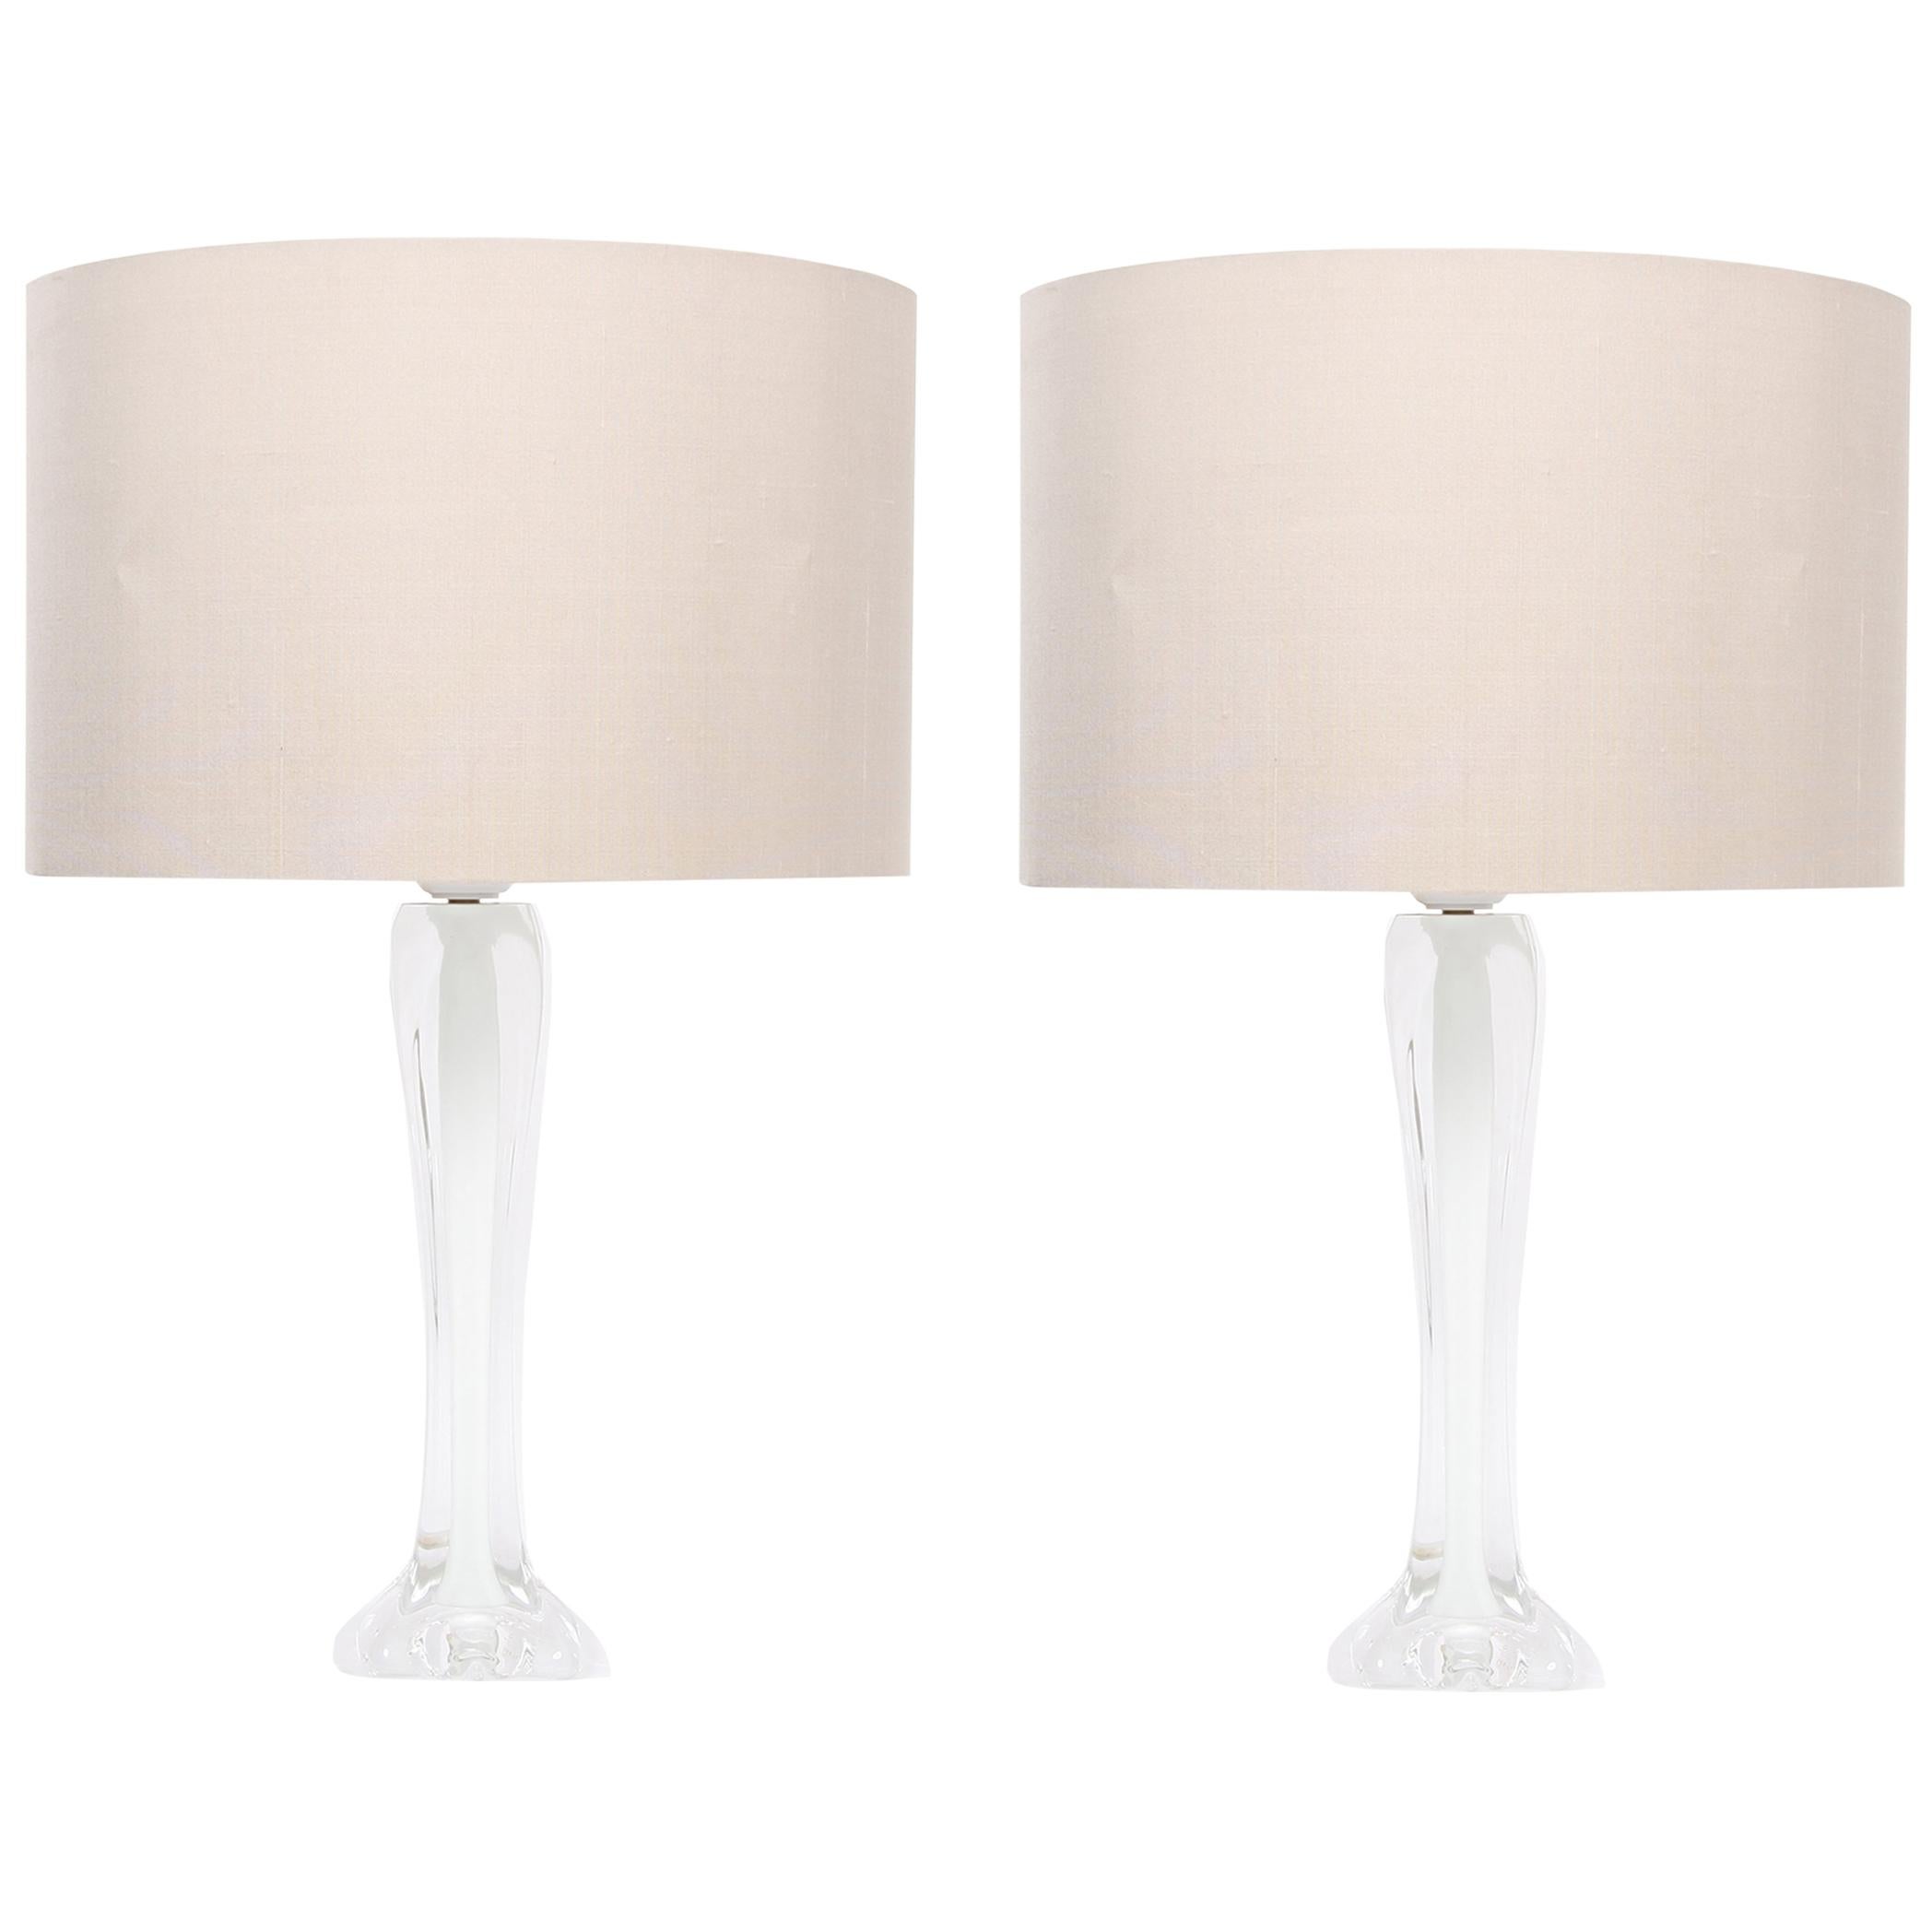 Pair of Swedish White Flygsfors Lamps For Sale